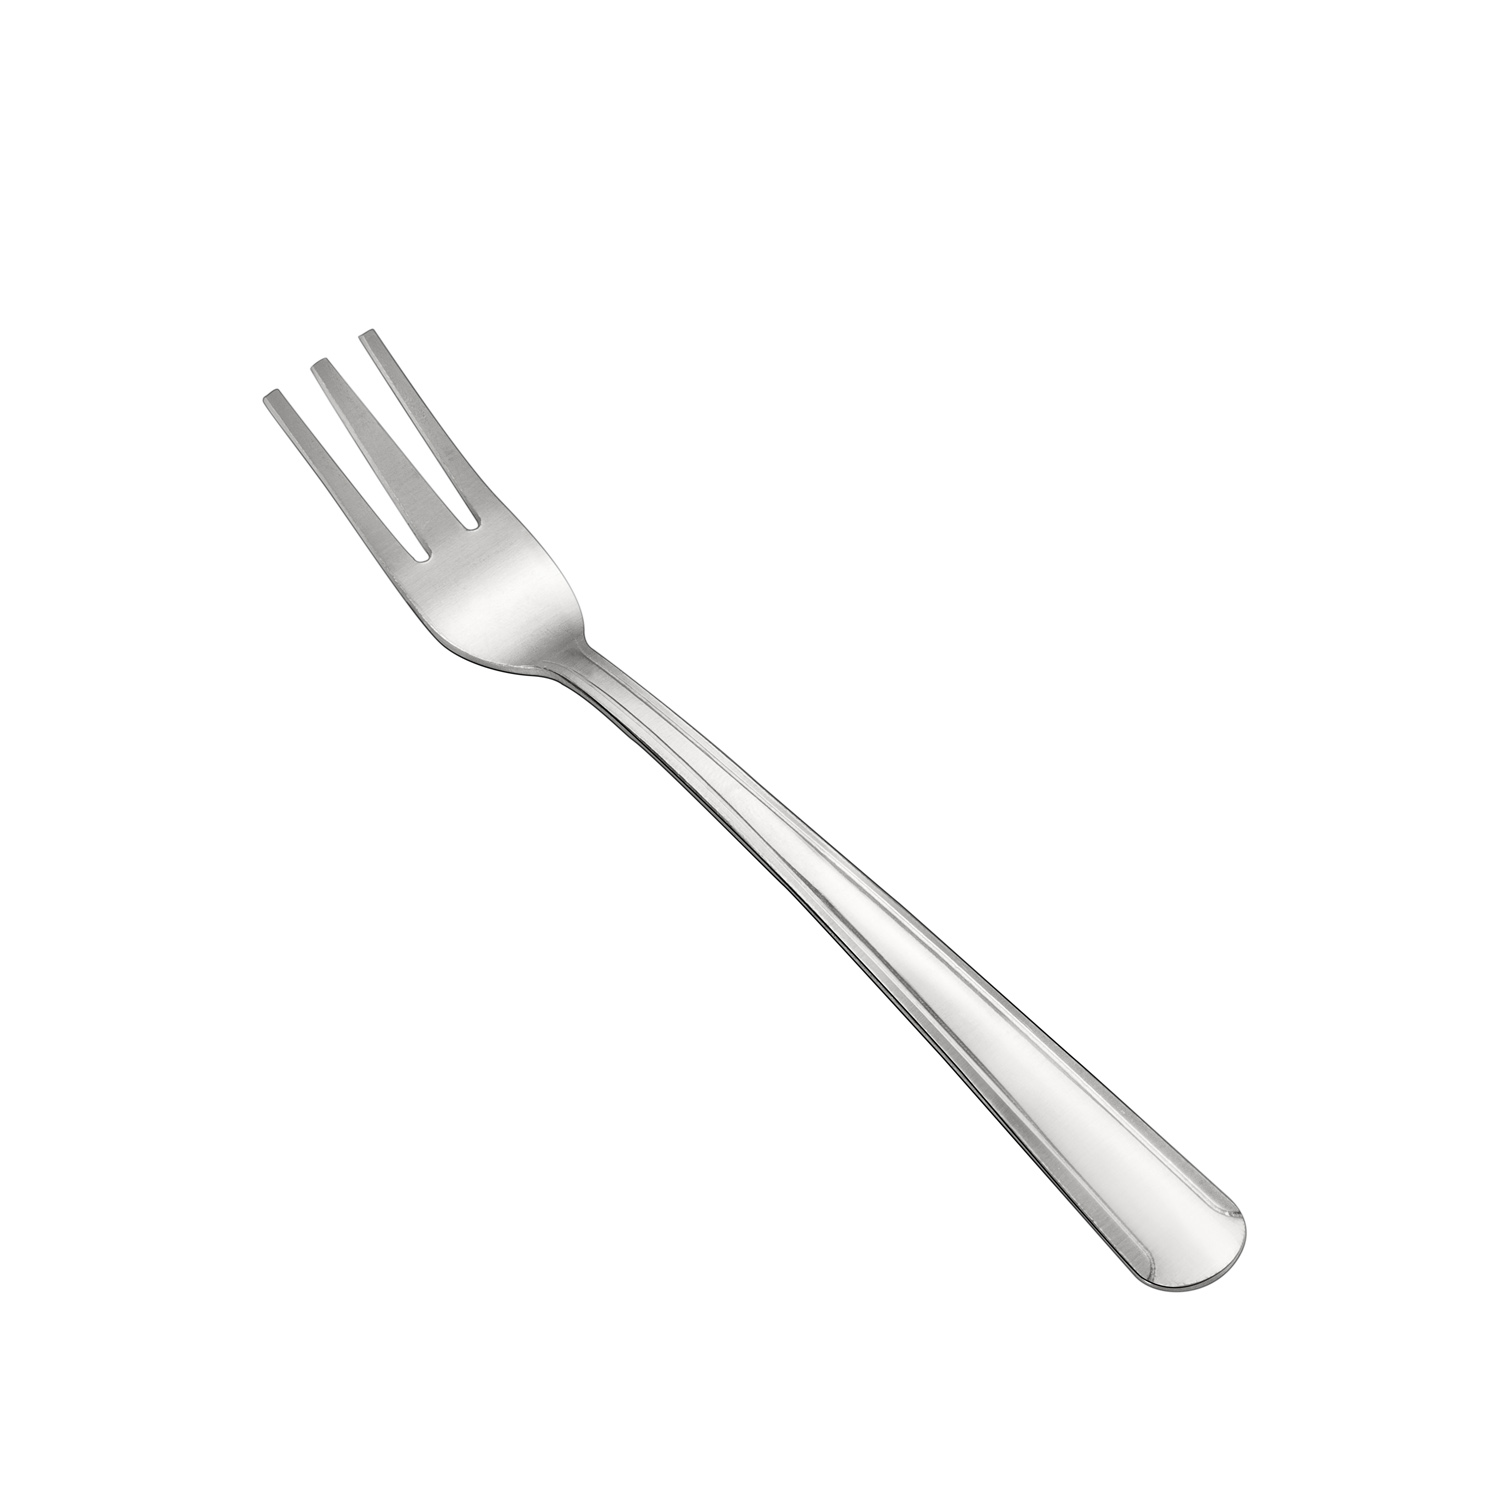 CAC China 1001-07 Dominion Oyster Fork, Medium Weight 18/0, 5 5/8"